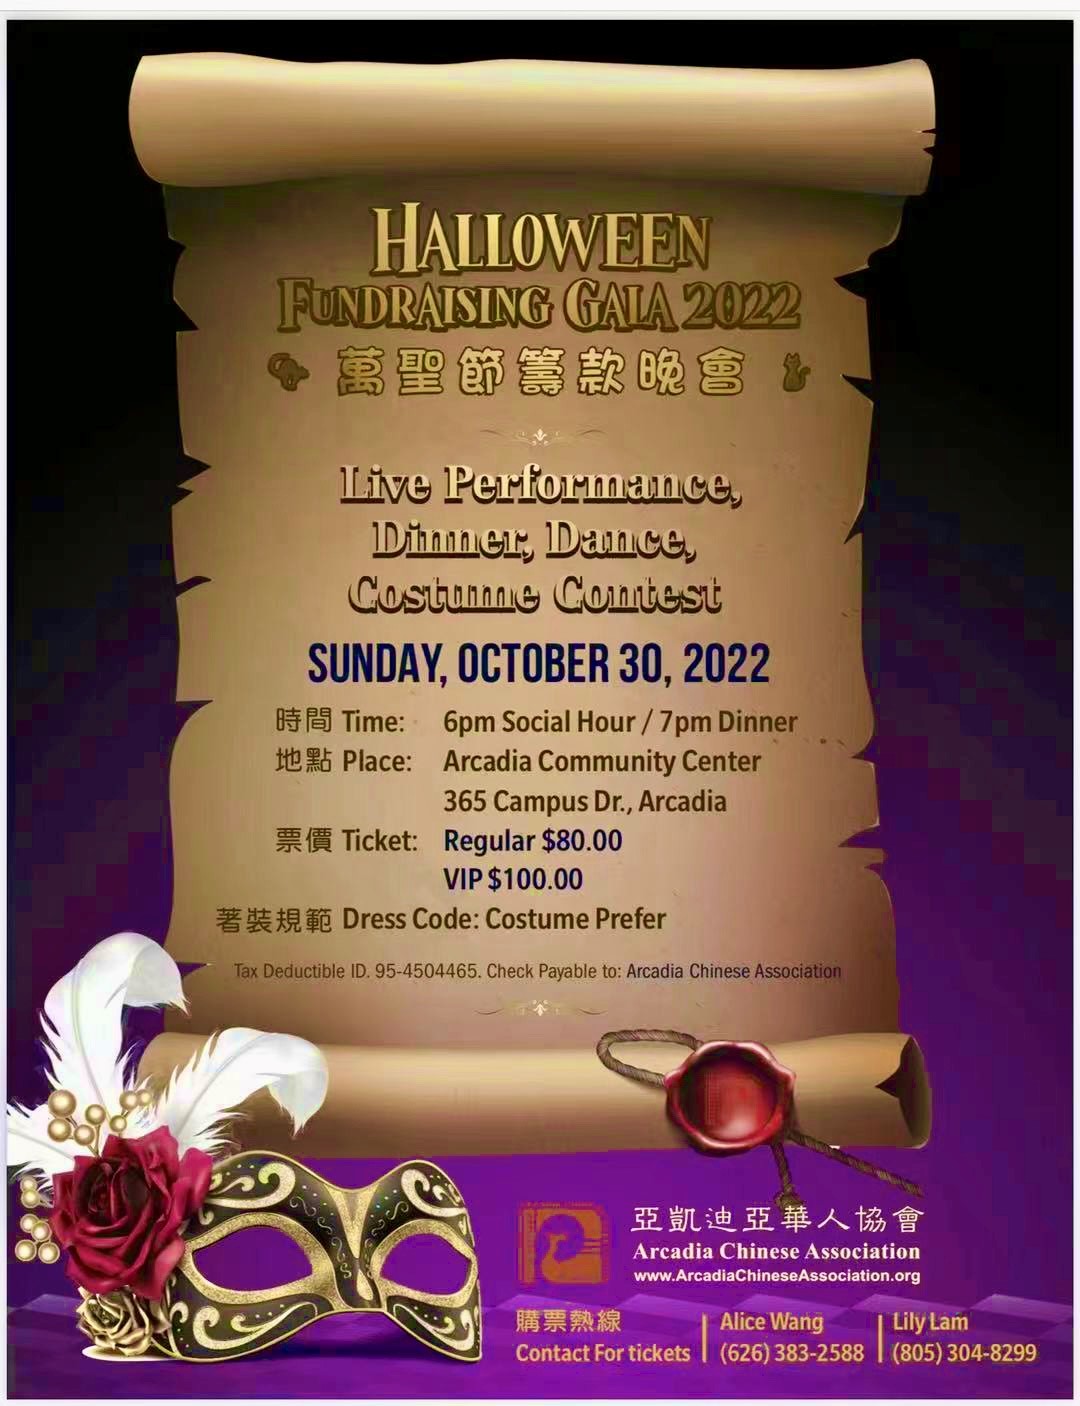 scroll showing information on Halloween Gala with masquerade mask below